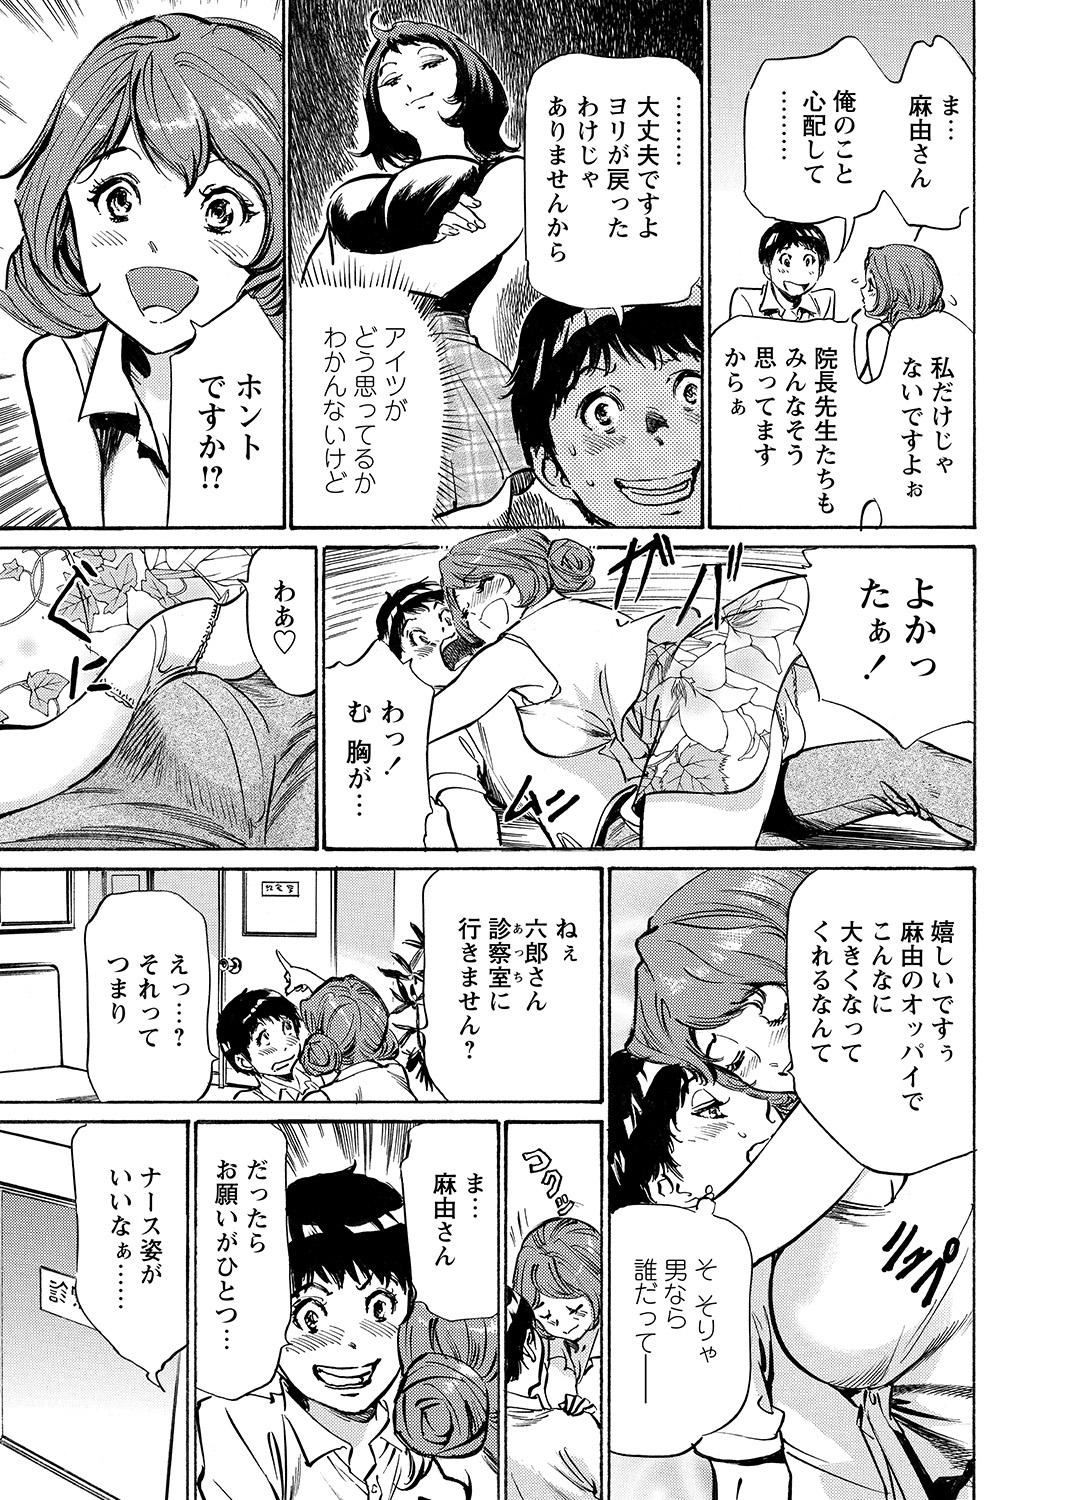 18yearsold WEB Bazooka Vol.8 Clothed - Page 6